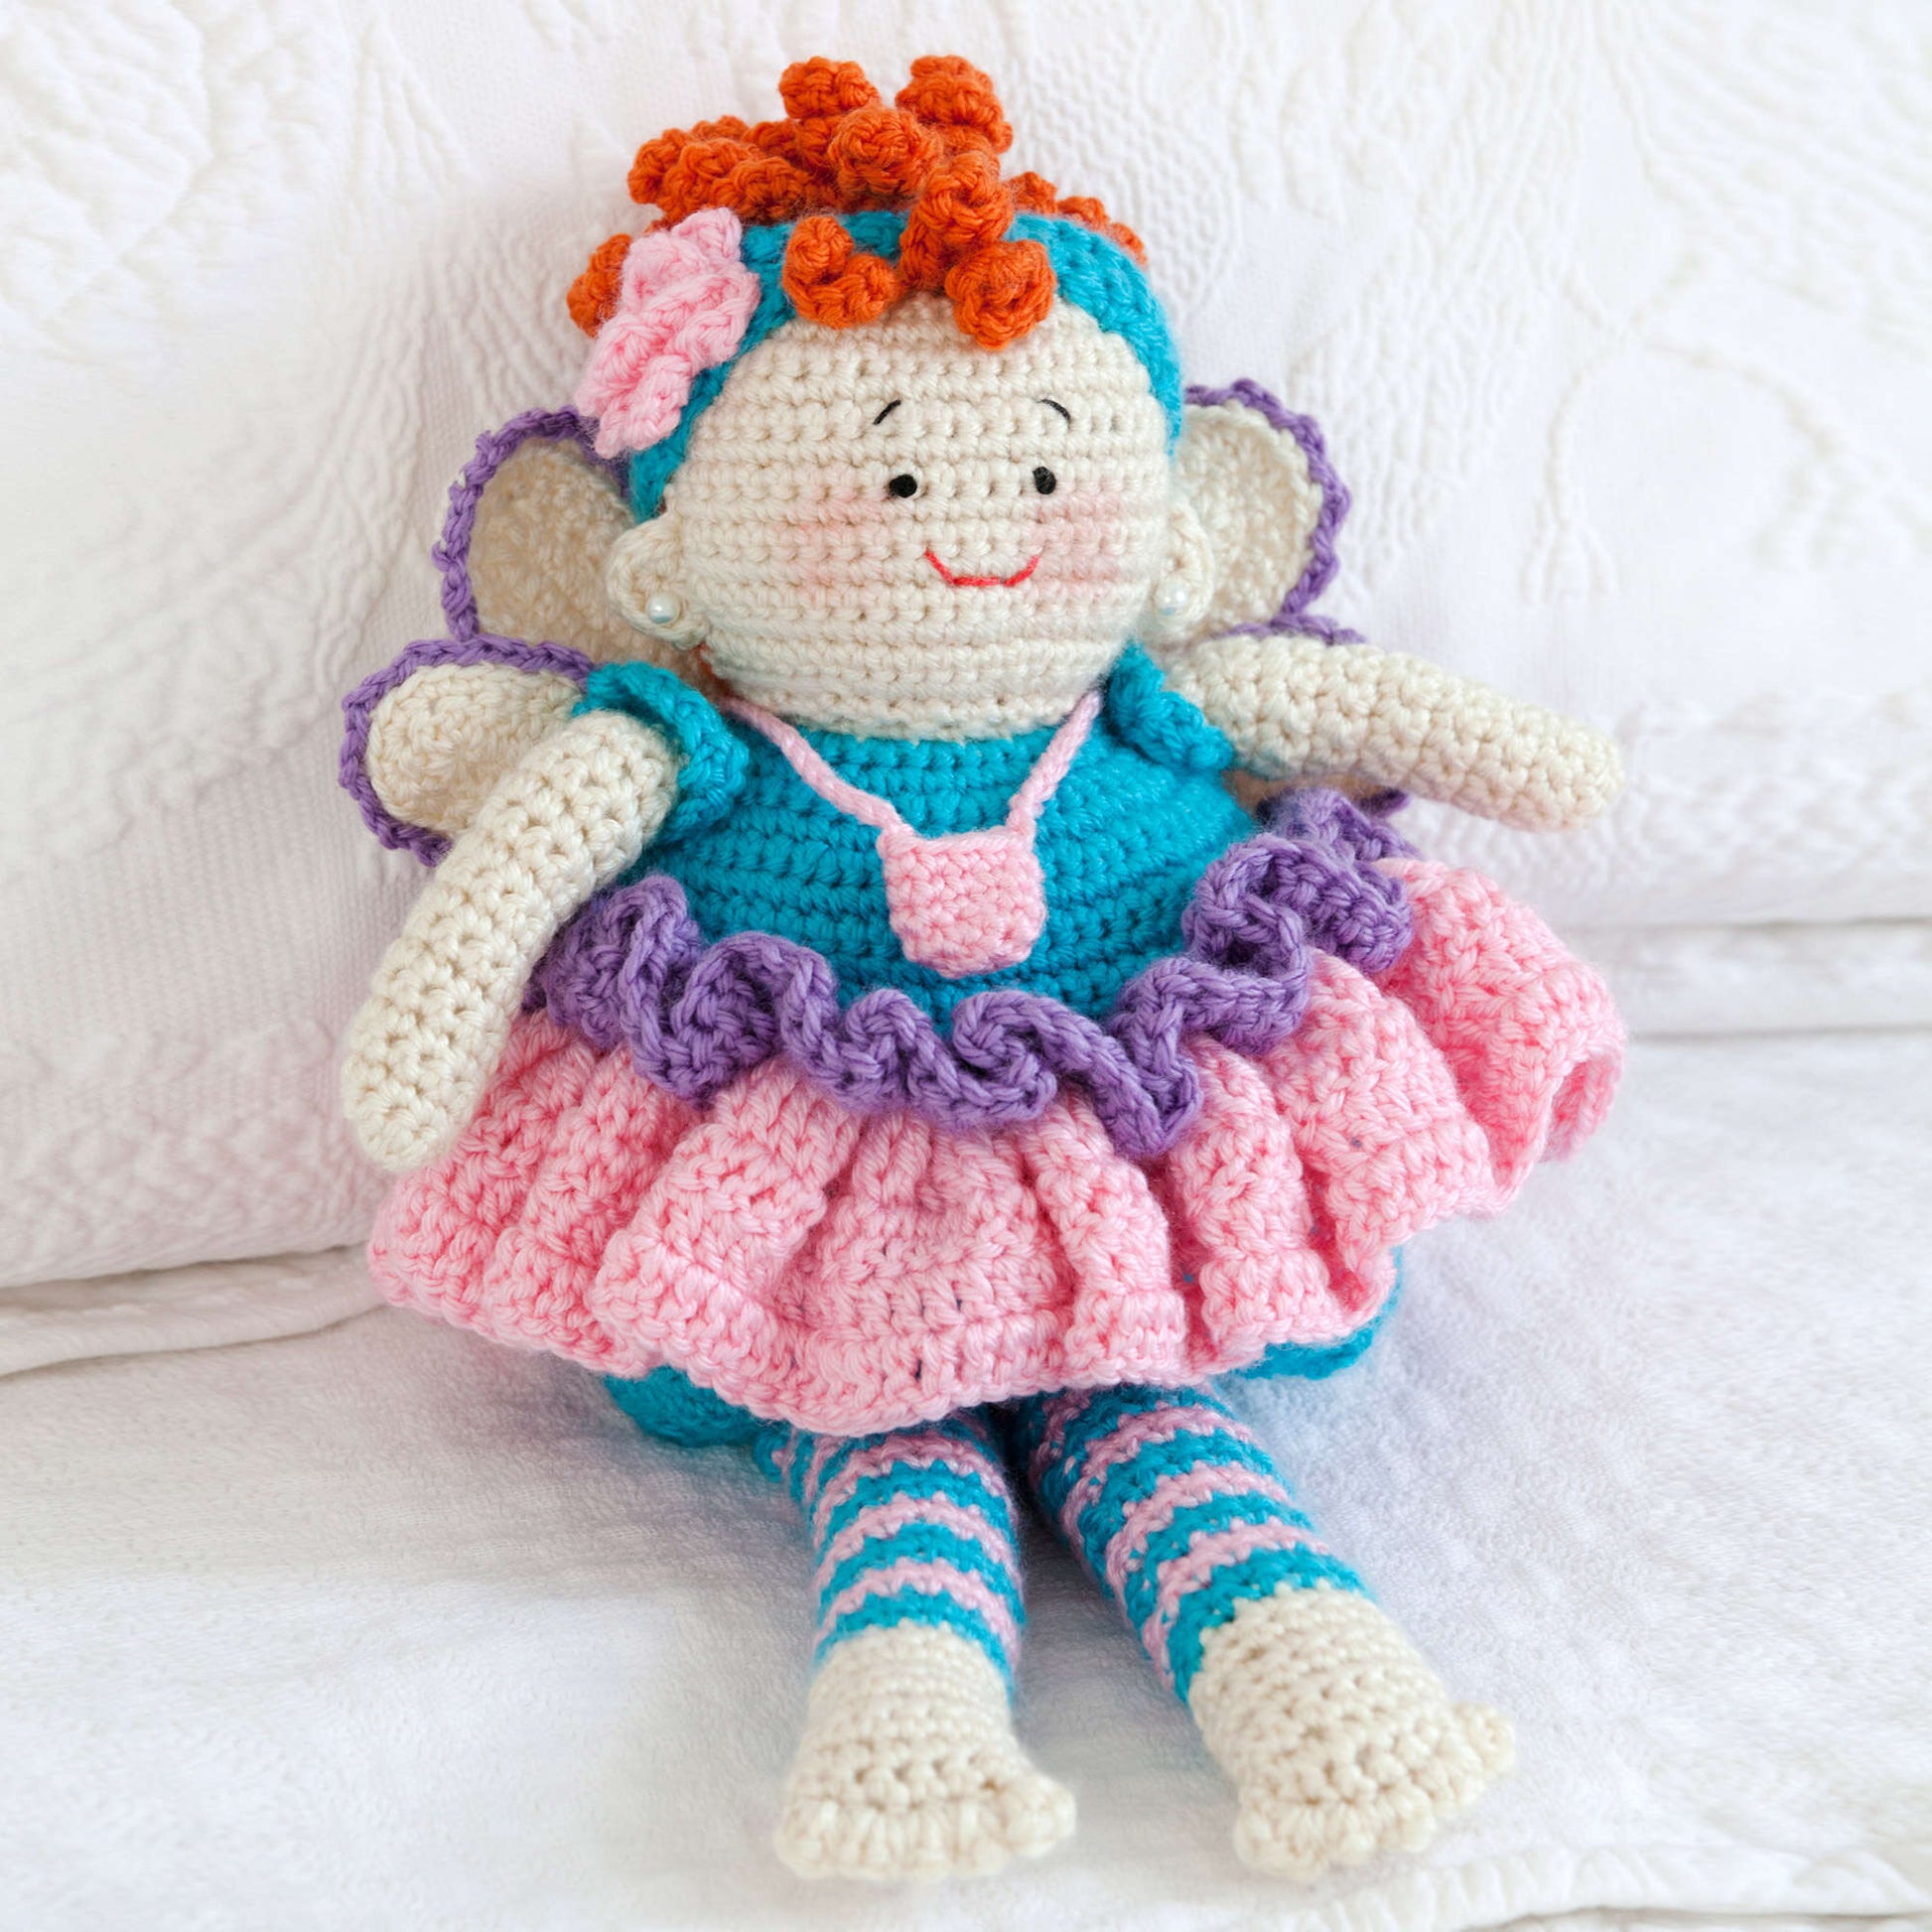 Free Red Heart Crochet Tooth Fairy Doll Pattern